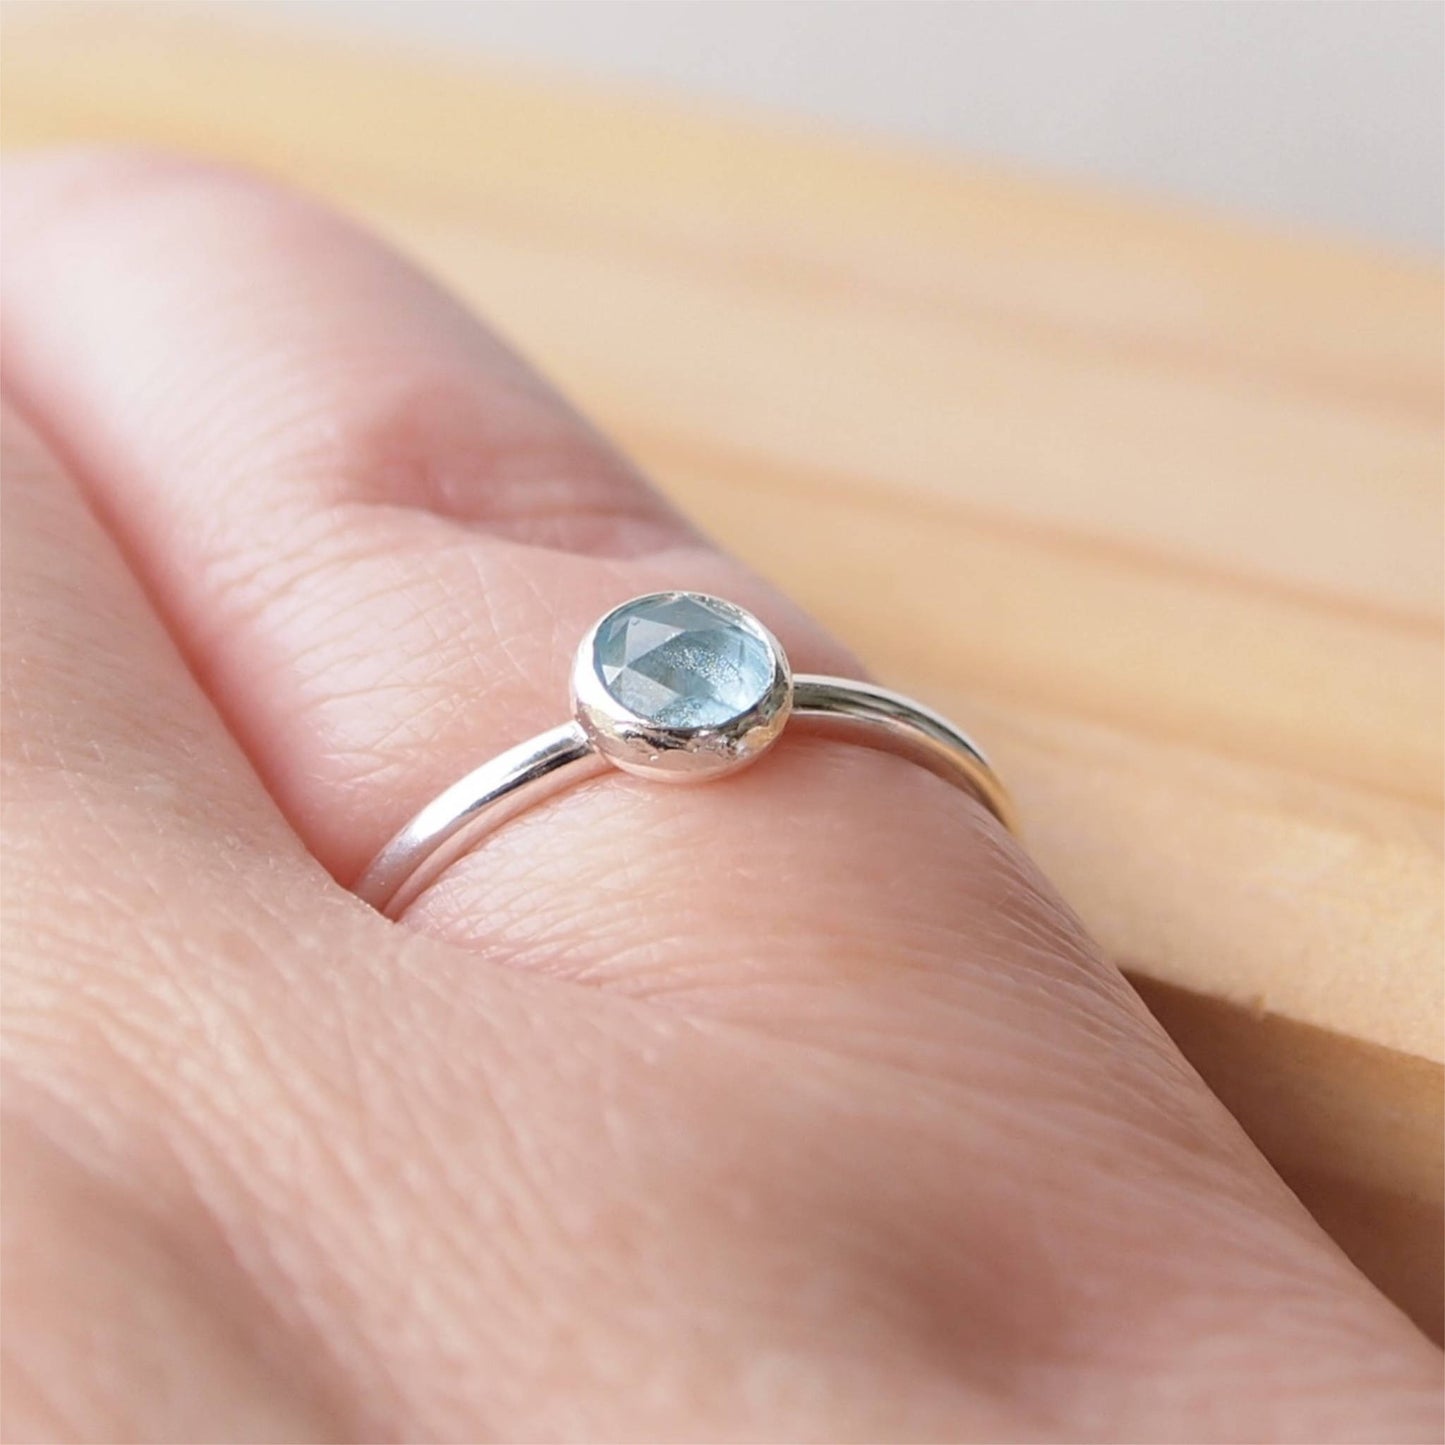 Simple style Aquamarine Silver ring with a round facet cut aquamarine cabochon pictured worn on hand. Made by maram jewellery